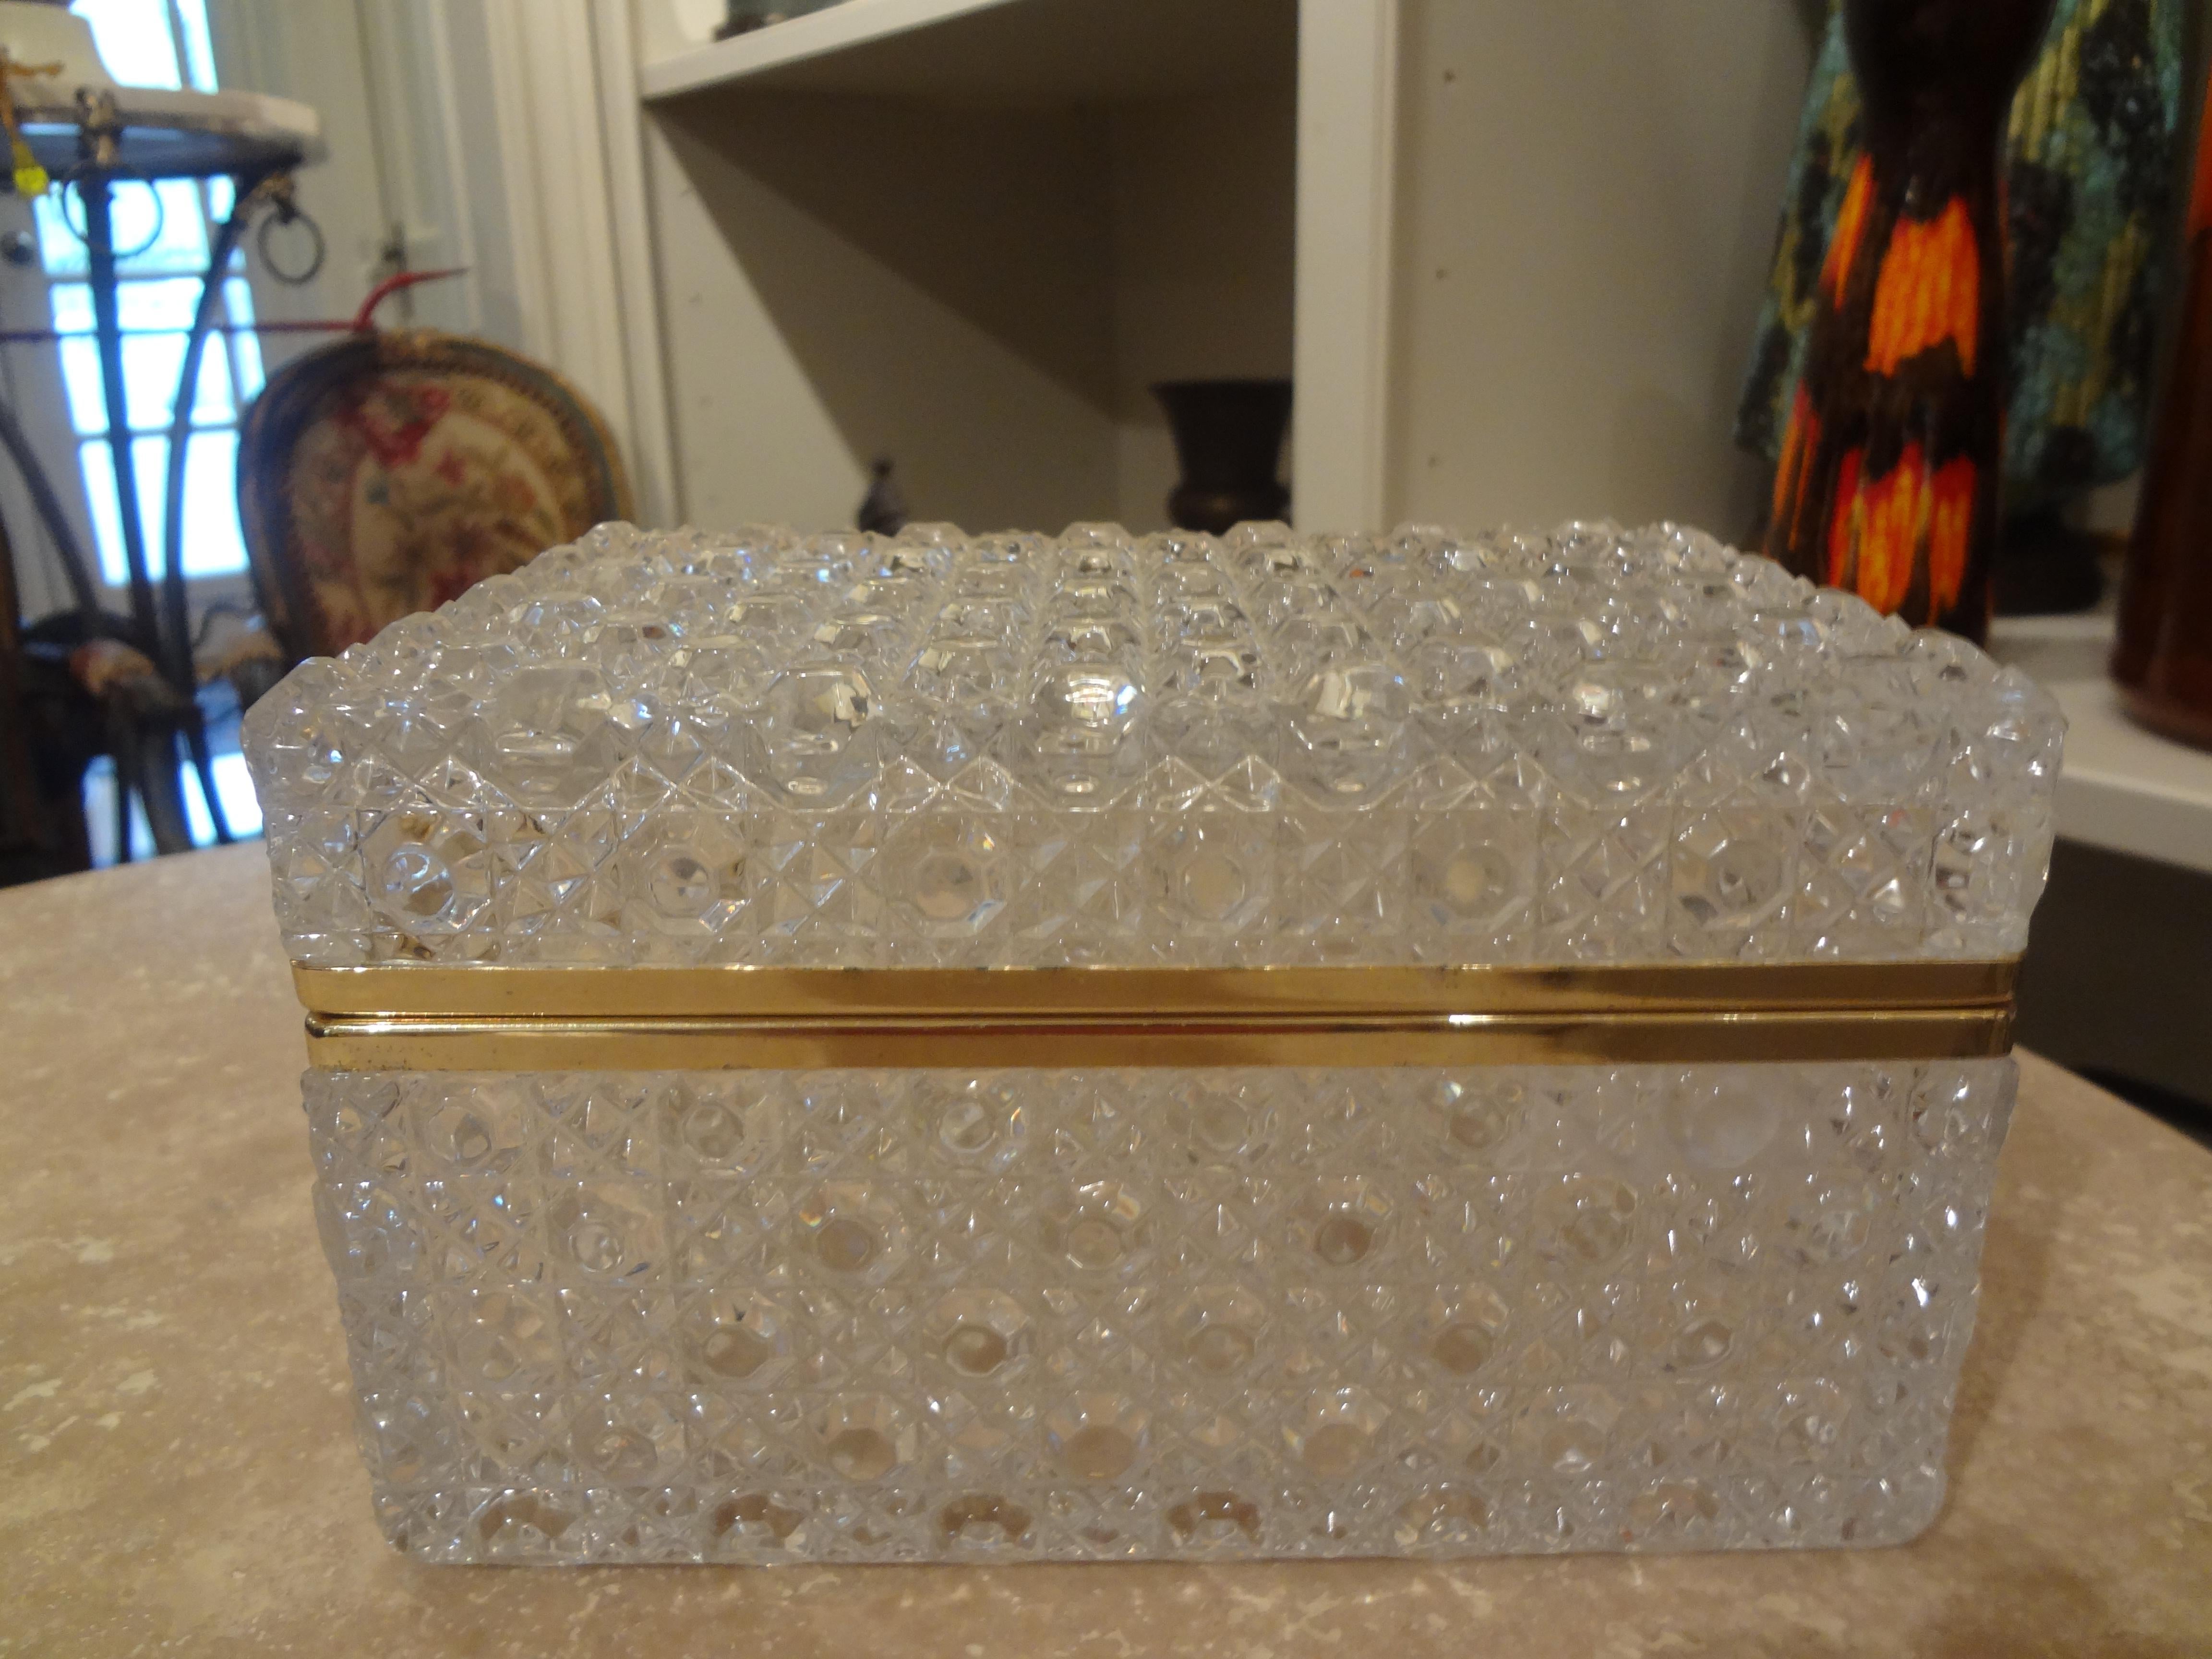 Vintage decorative glass box trimmed in brass. This beautiful glass box has a quilted design and makes a great coffee table accessory or jewelry box or jewel casket.